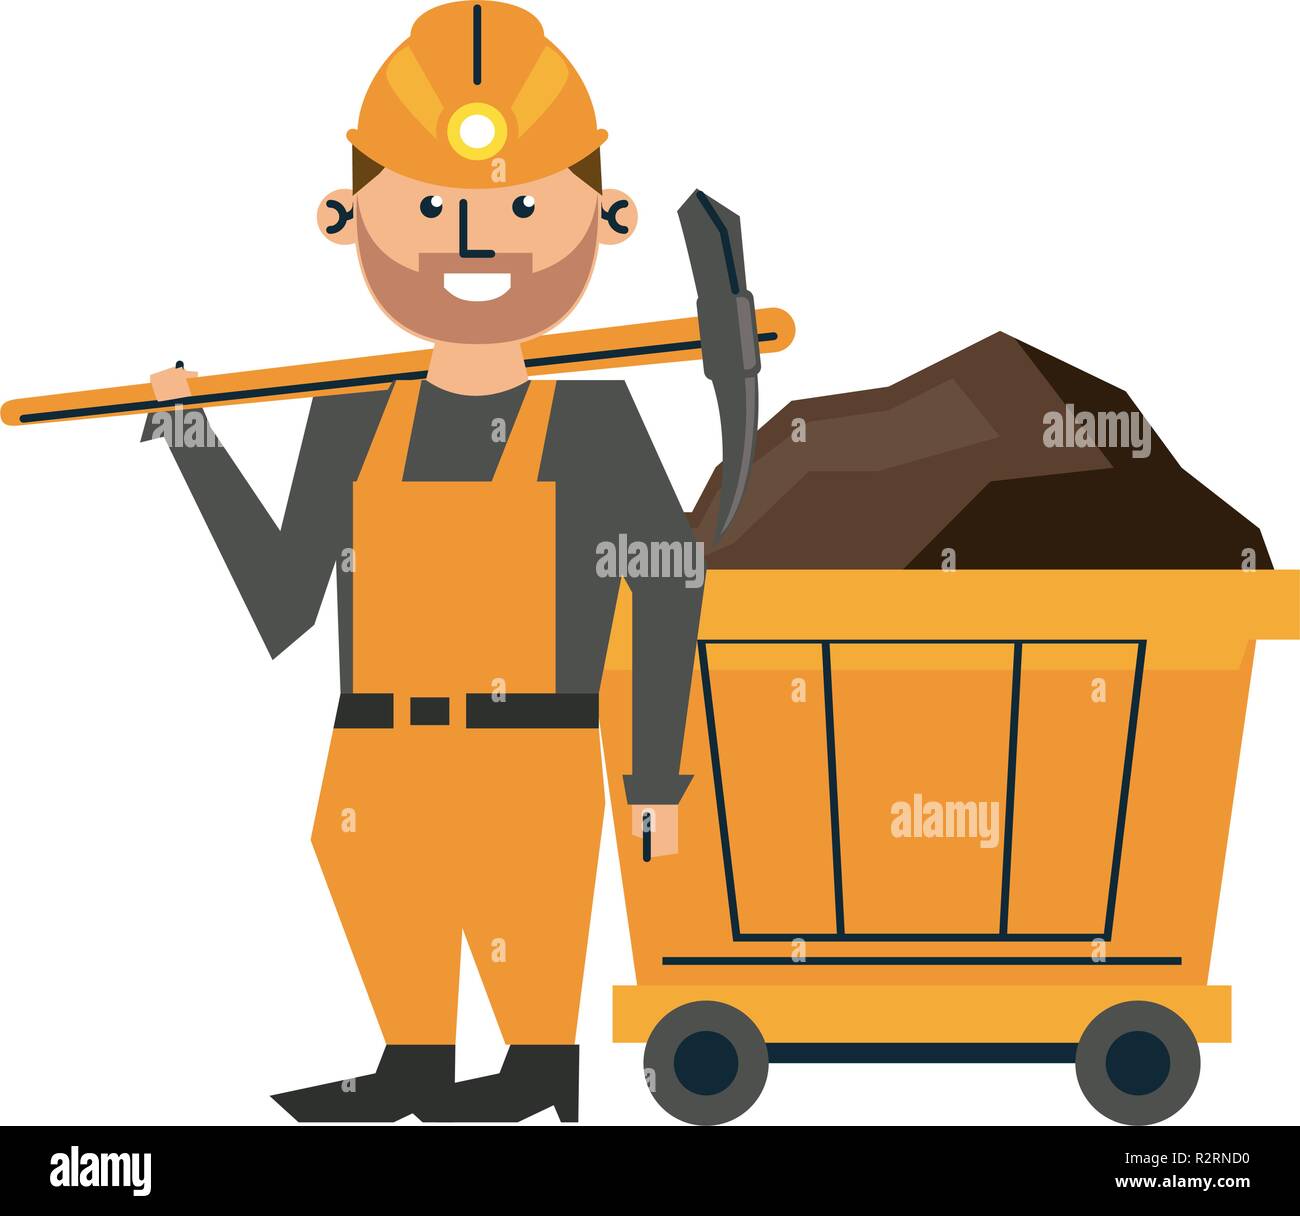 Ming worker with pick and wagon vector illustration graphic design Stock Vector